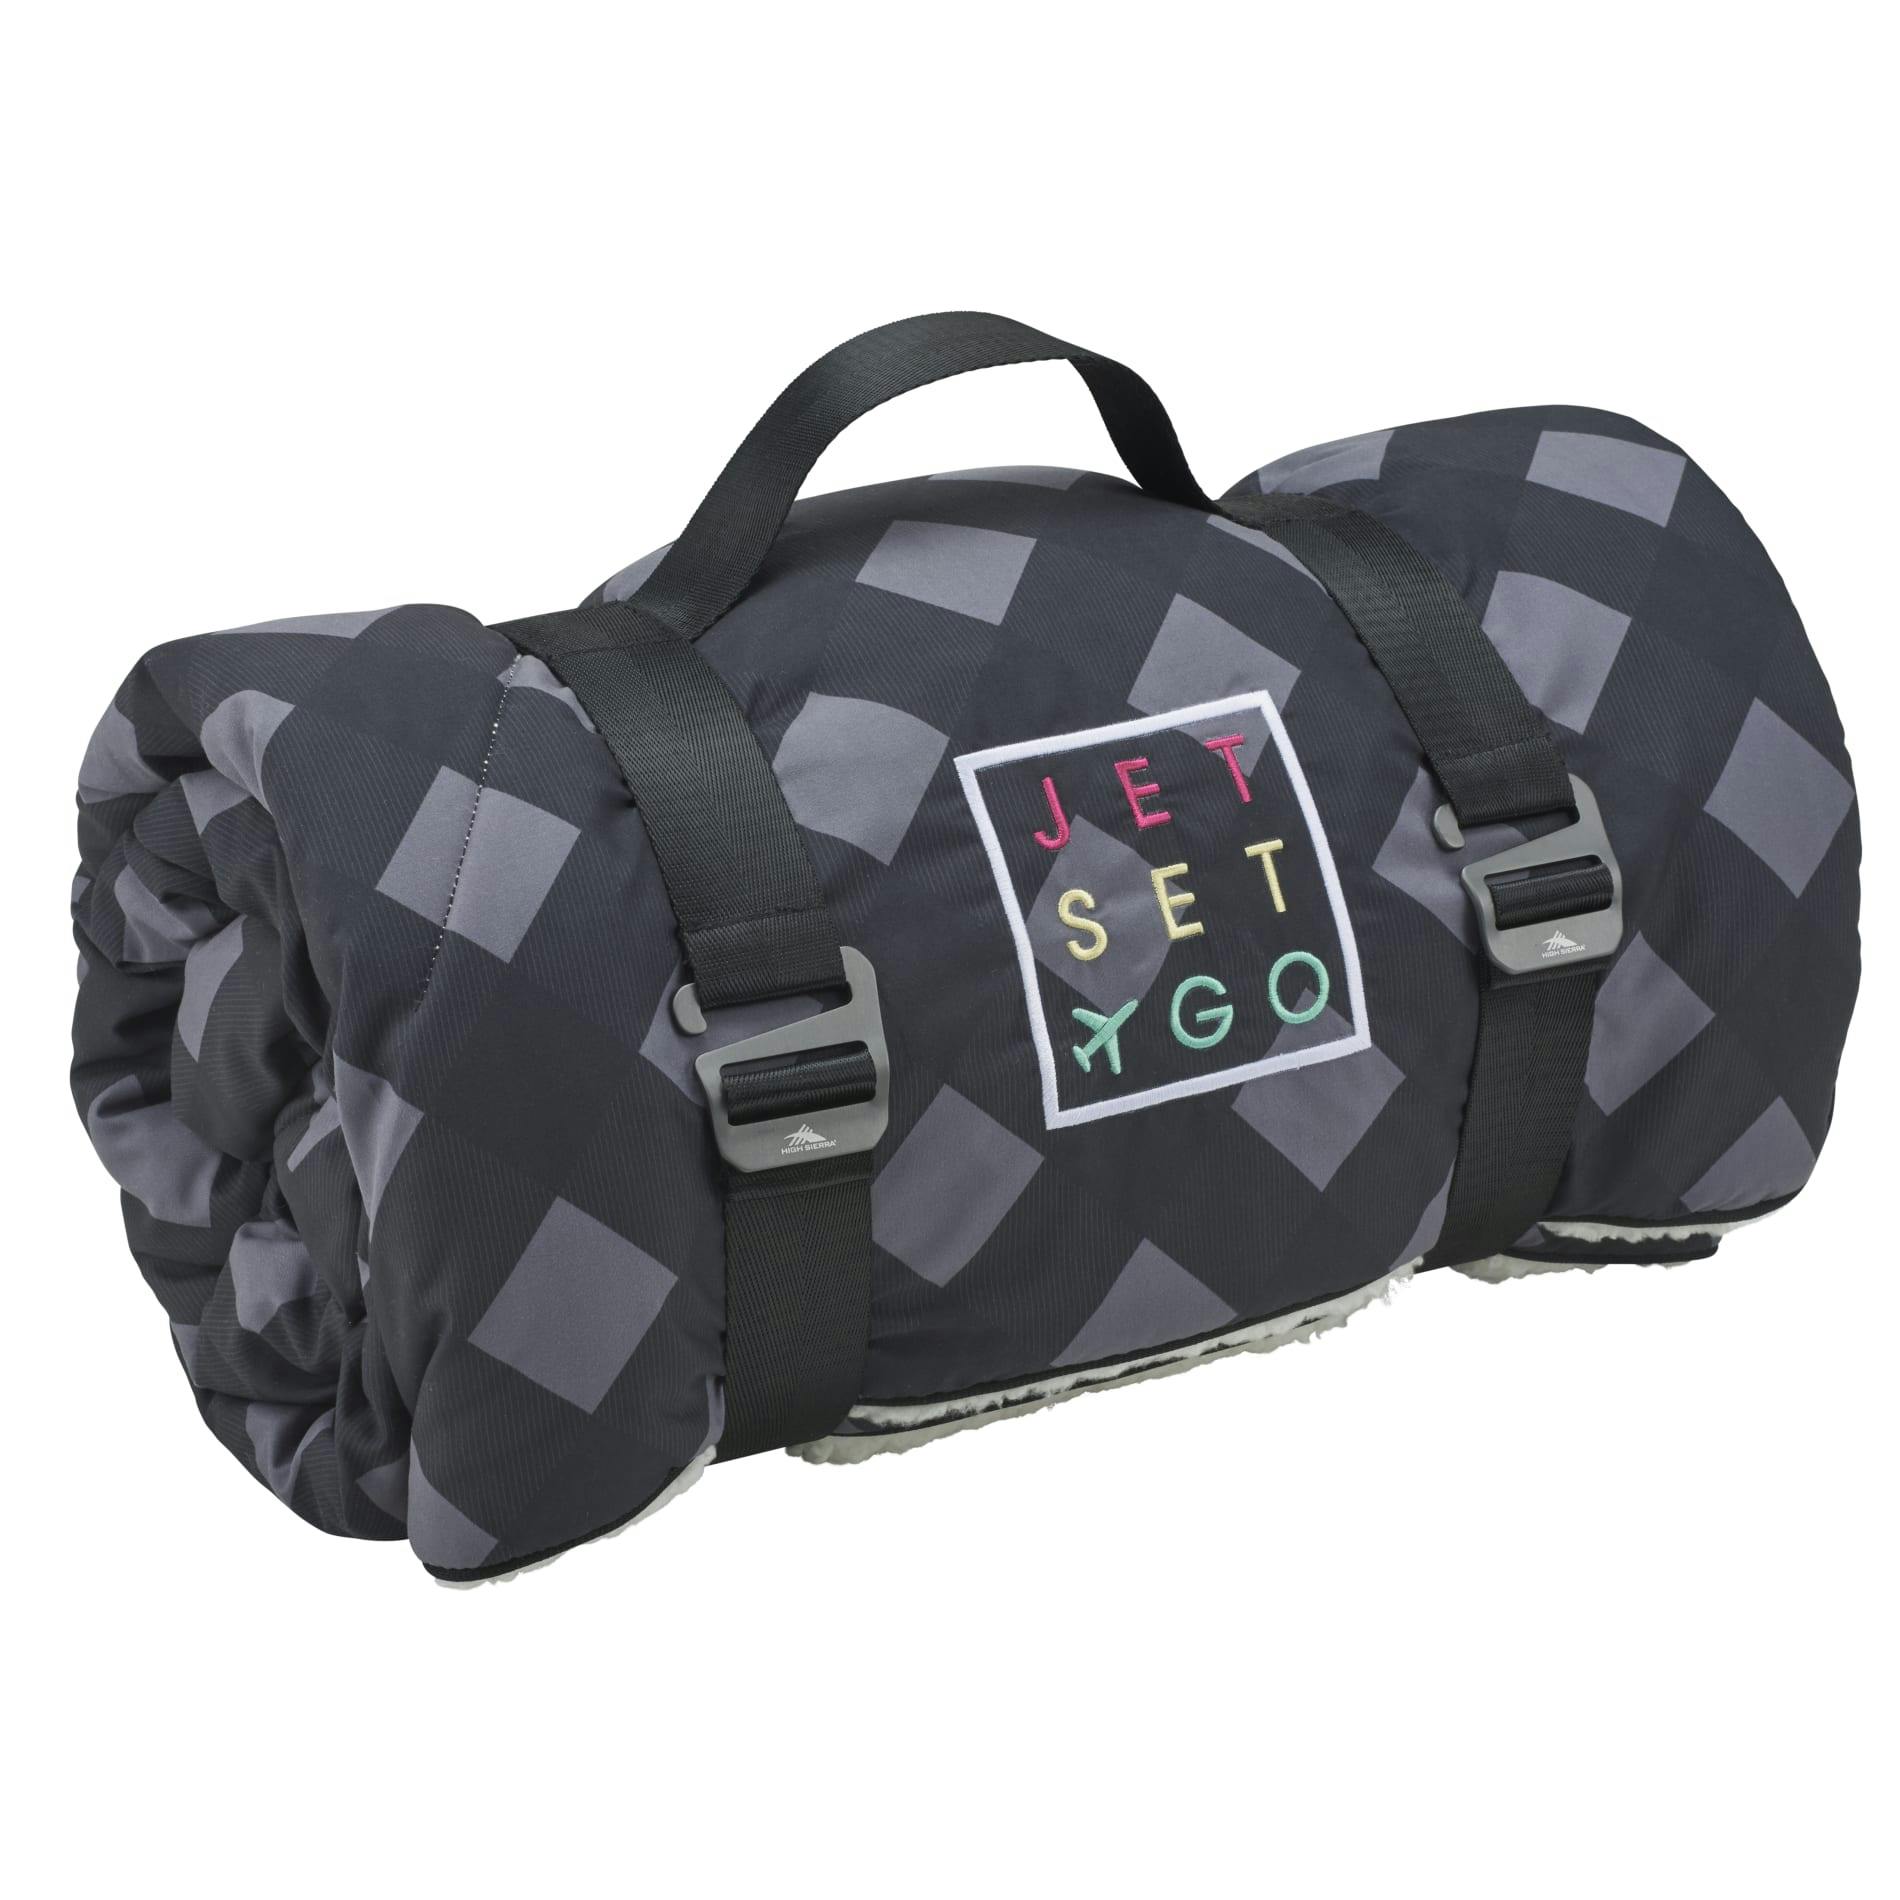 High Sierra Roll-Up Puffy Sherpa Blanket - additional Image 1